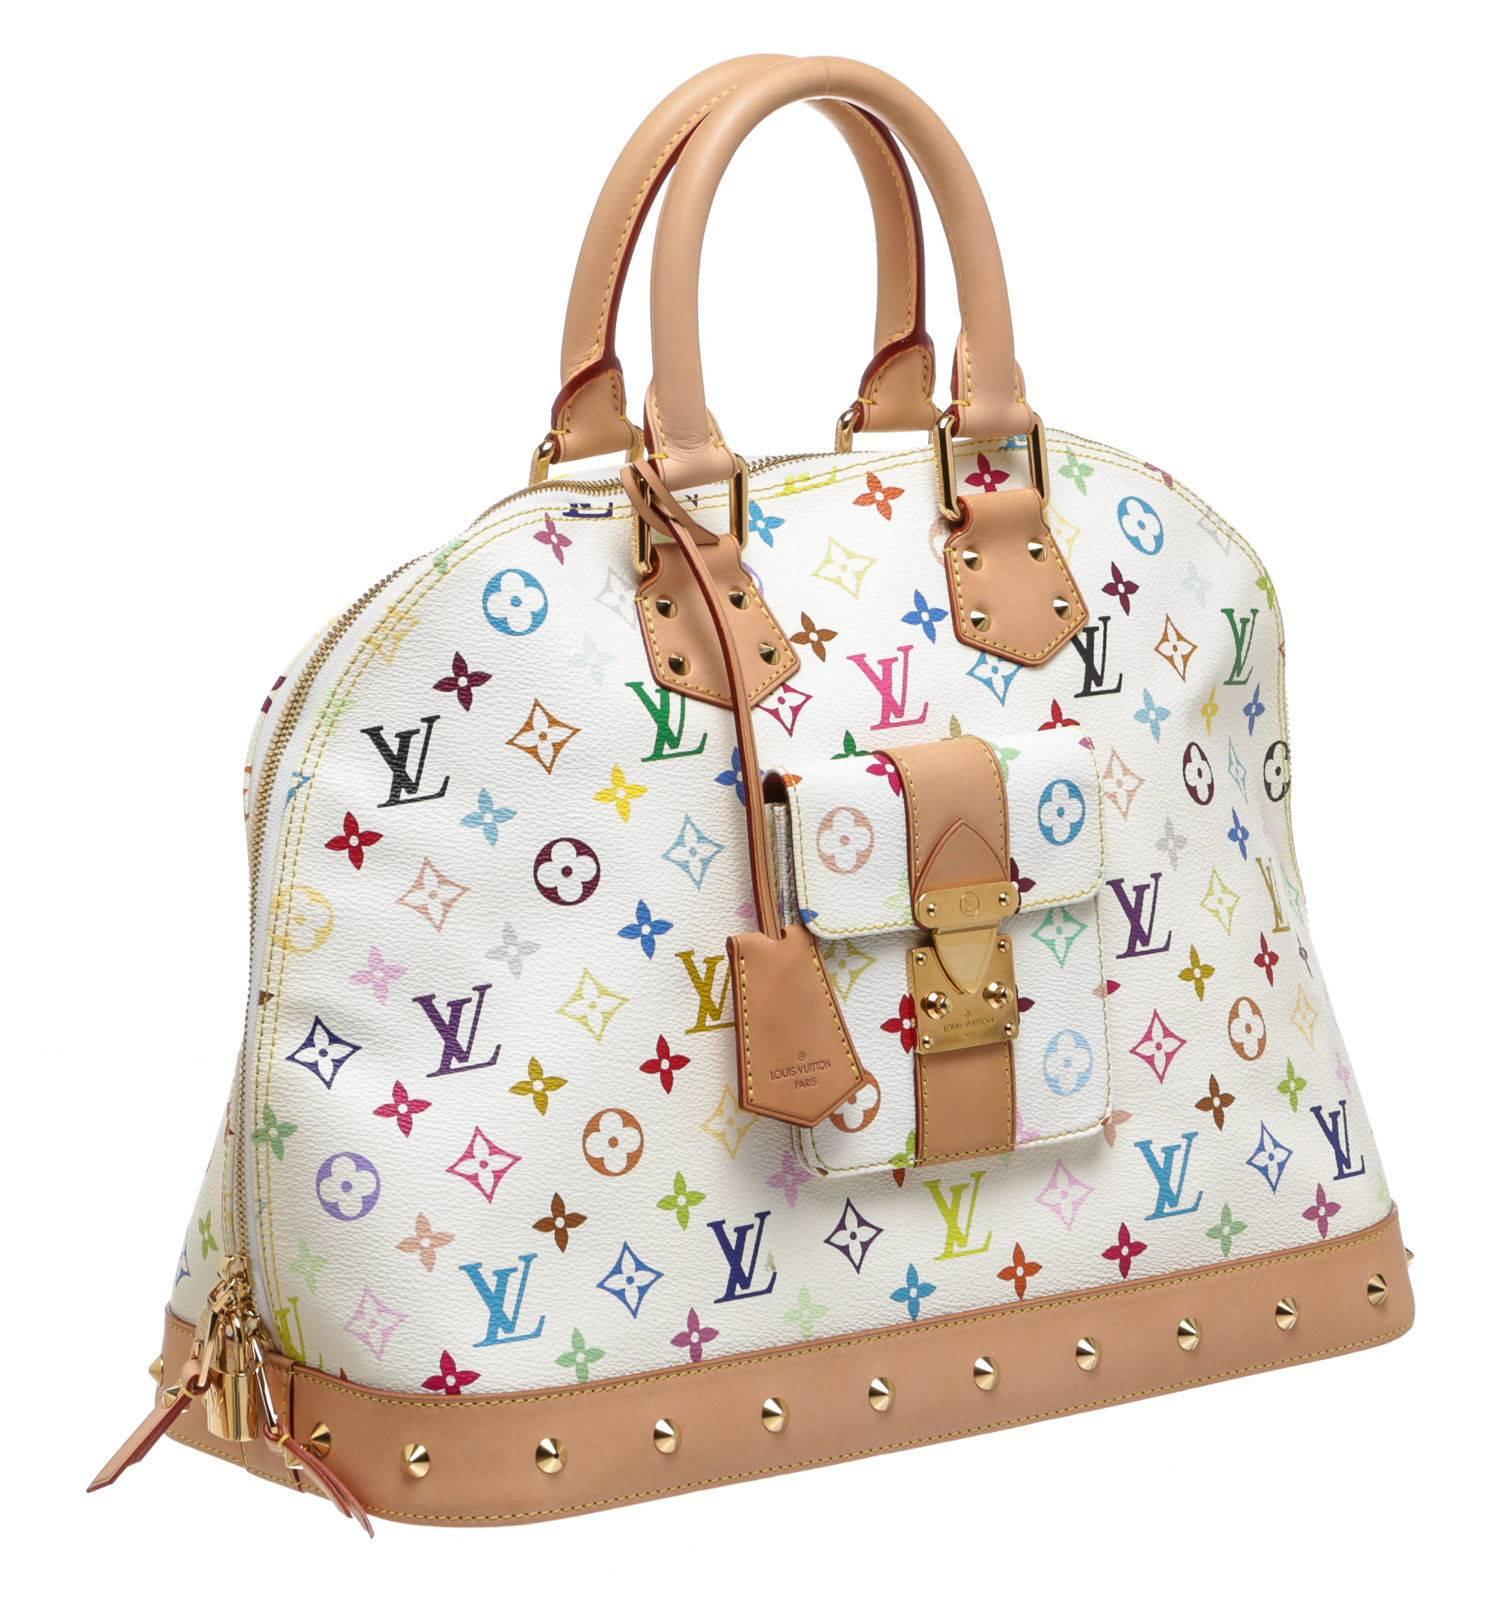 Designer: Louis Vuitton
Type:
Handbag
Condition:
Exterior: Pre-owned in very good condition - faint wear
Interior: Pre-owned in very good condition - faint wear
Color:
White/Multicolor
Material:
Coated Canvas
Dimensions:
15